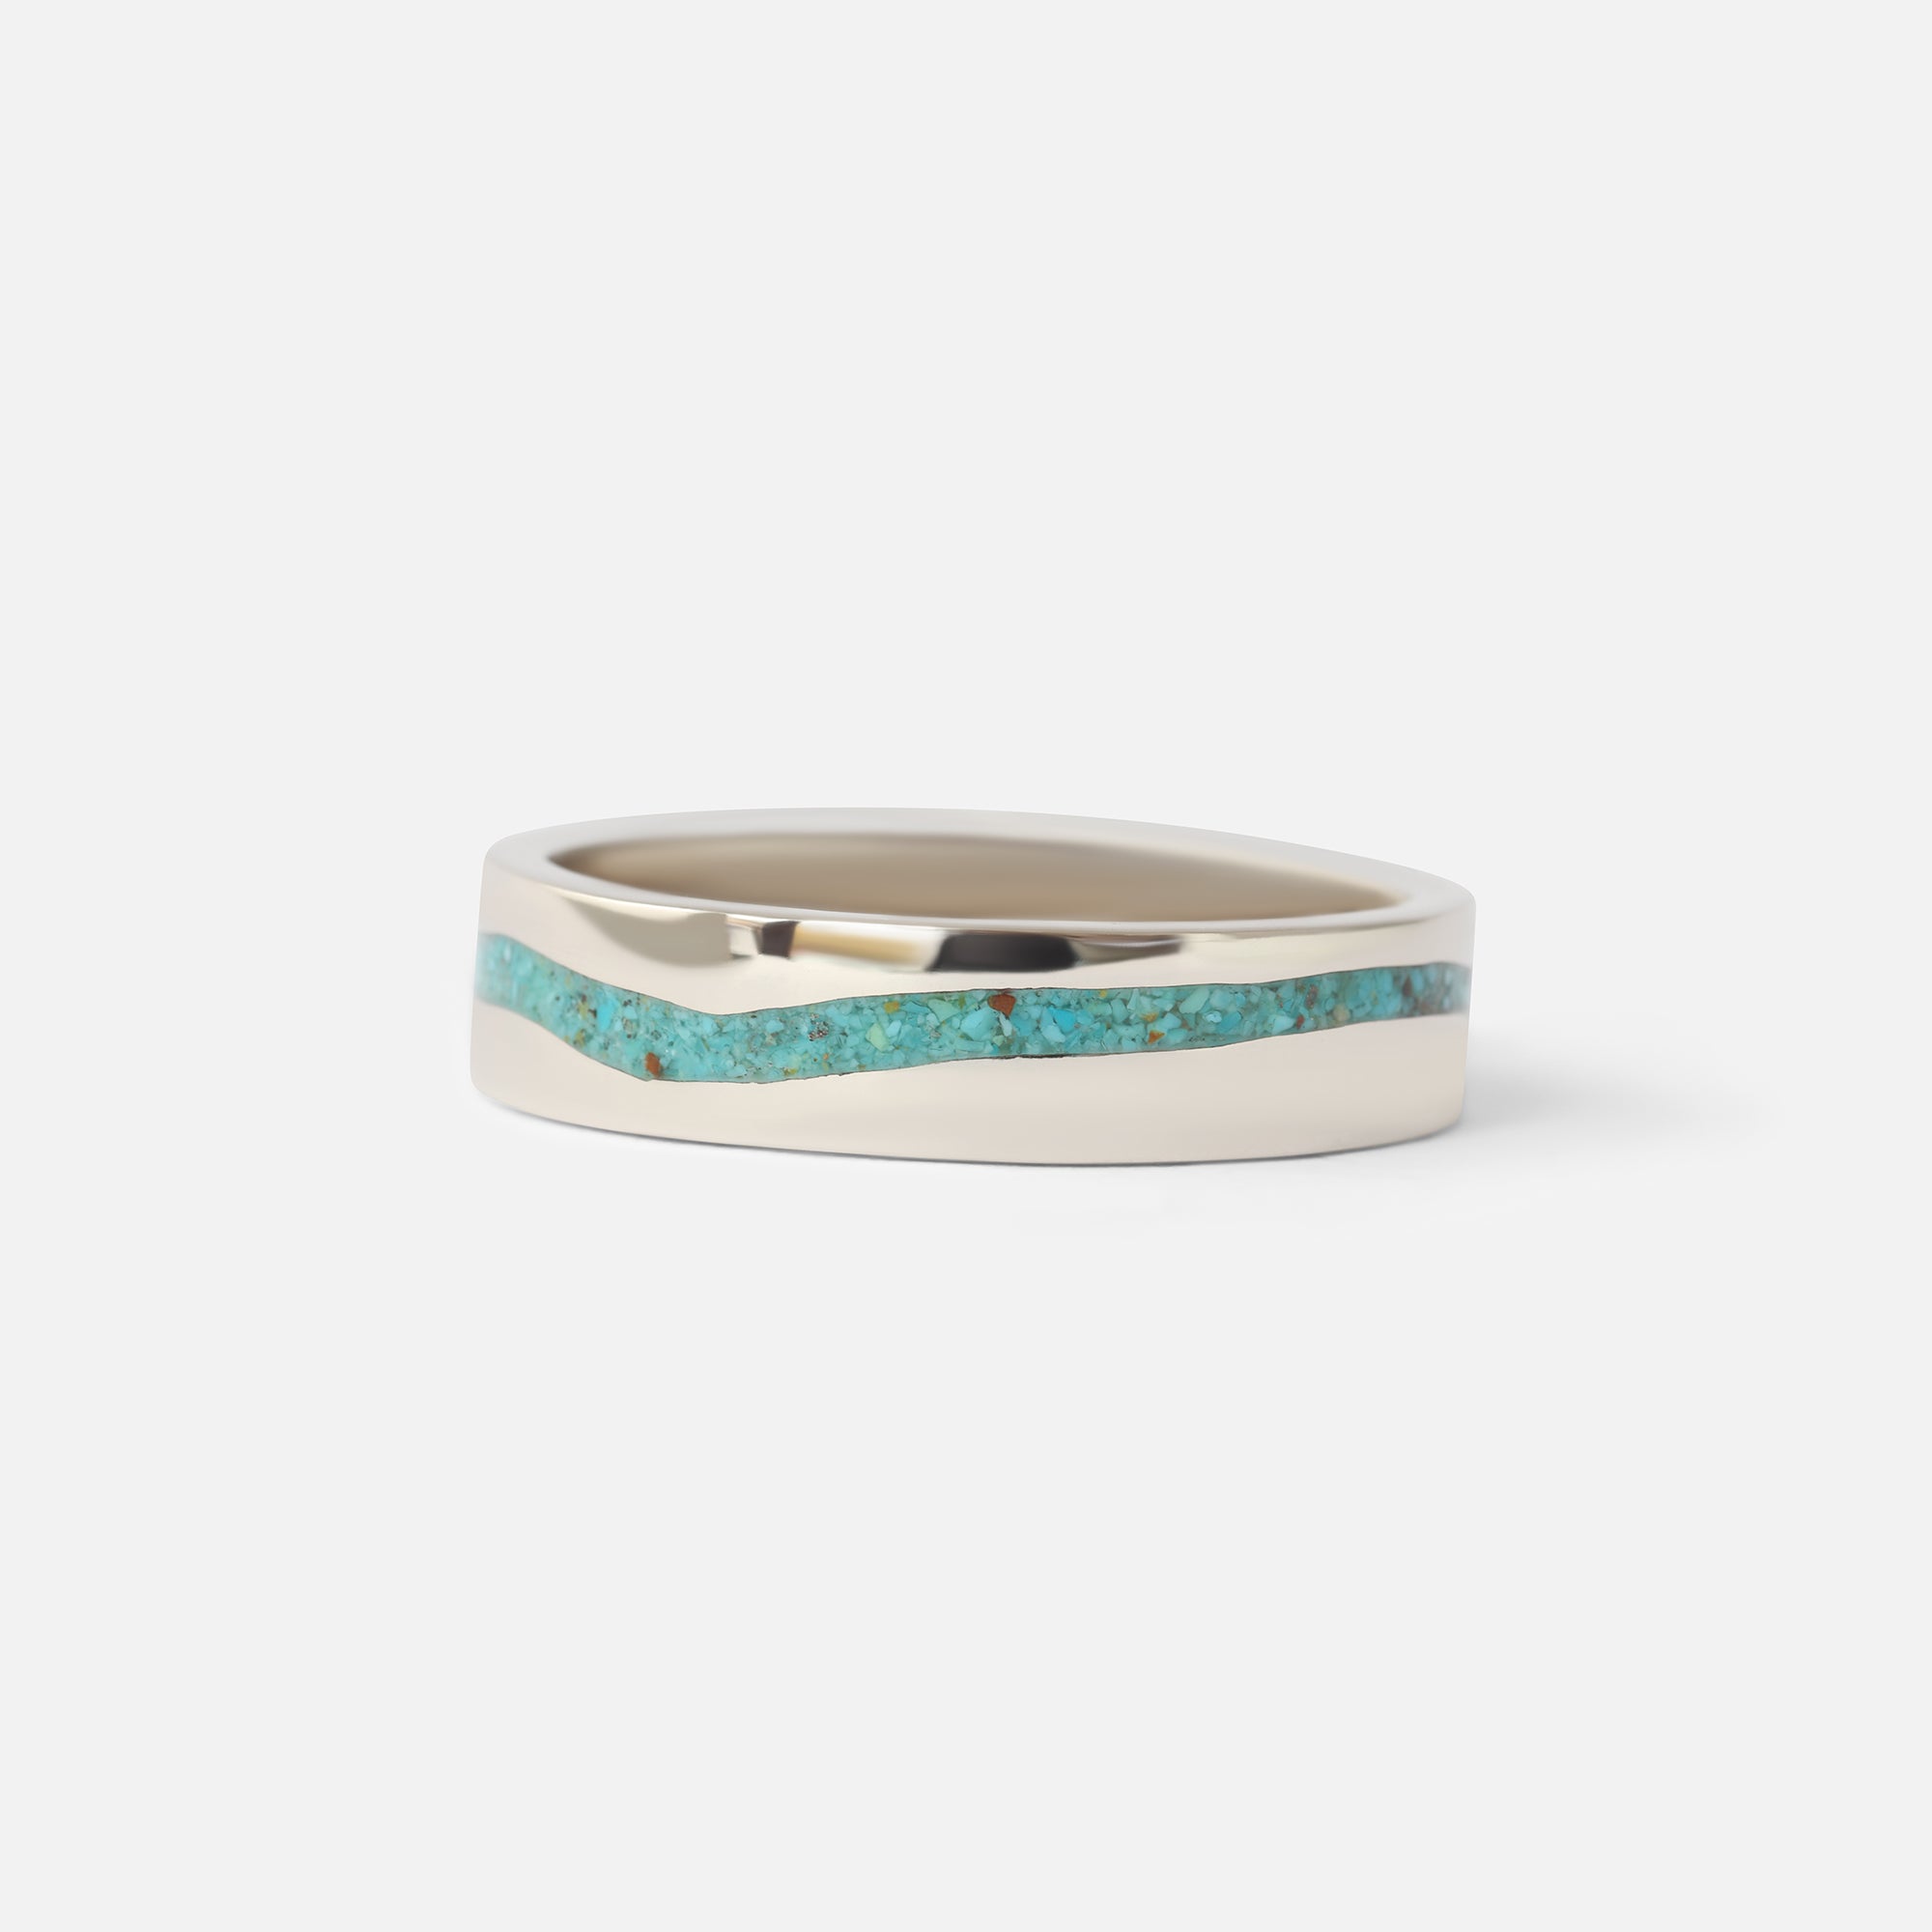 River Inlay Band By Kestrel Dillon in Wedding Bands Category